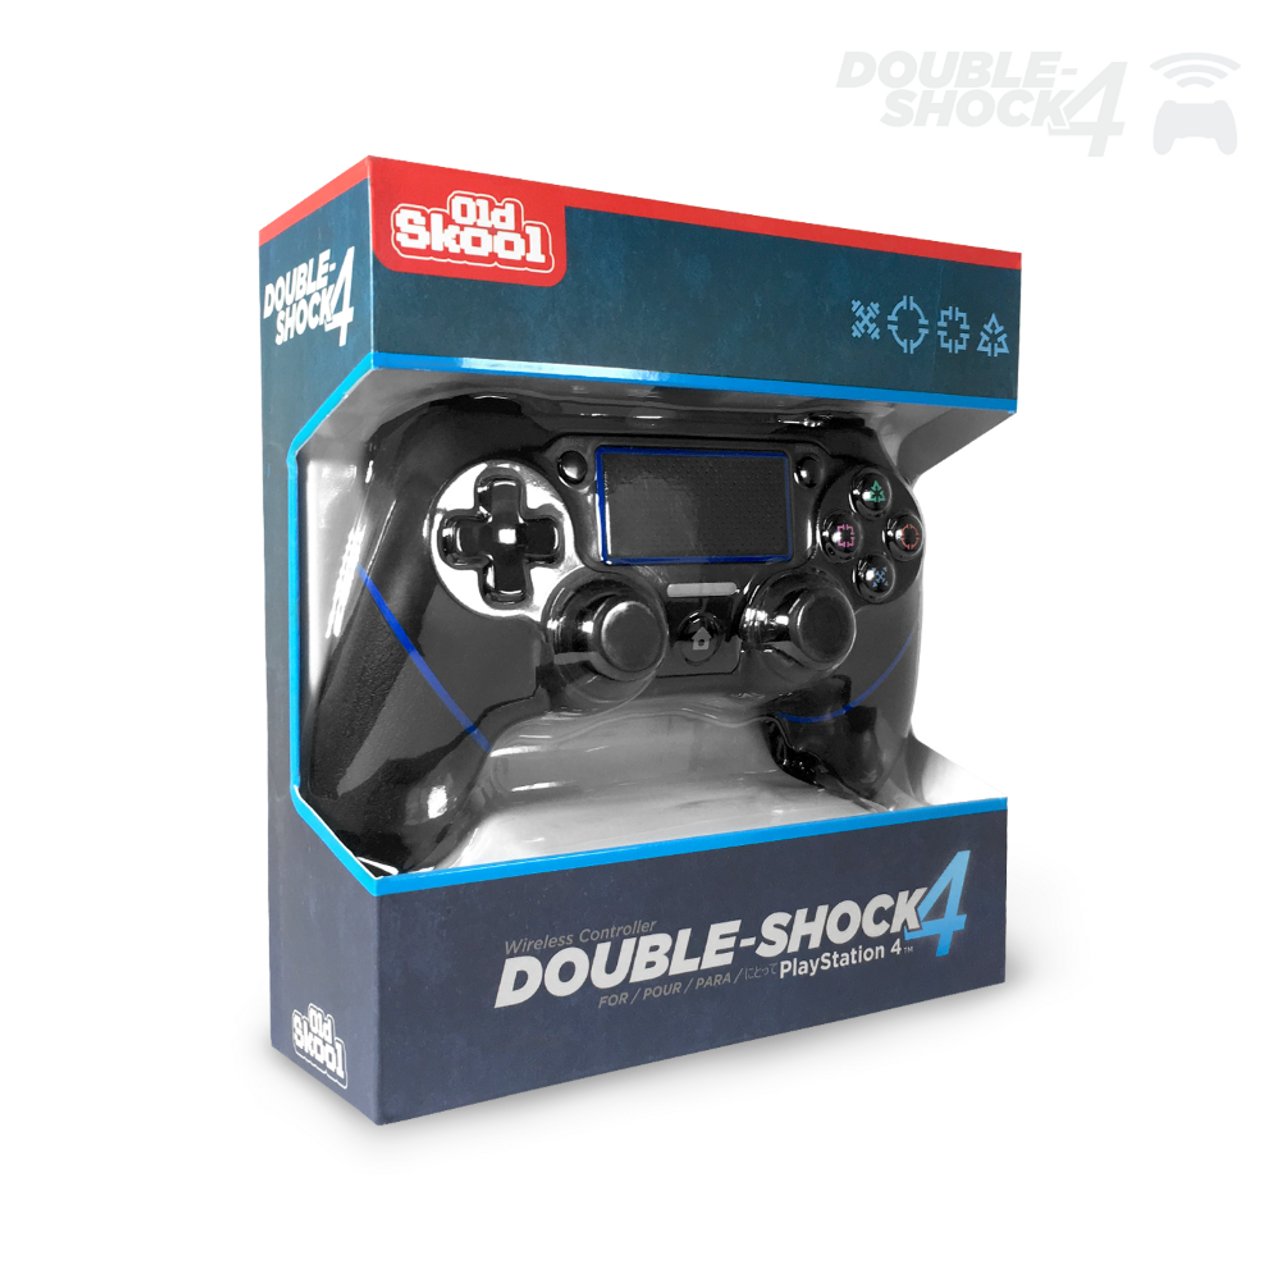 Double-Shock 4 Wireless Controller for PlayStation 4 available at  Videogamesnewyork, NY